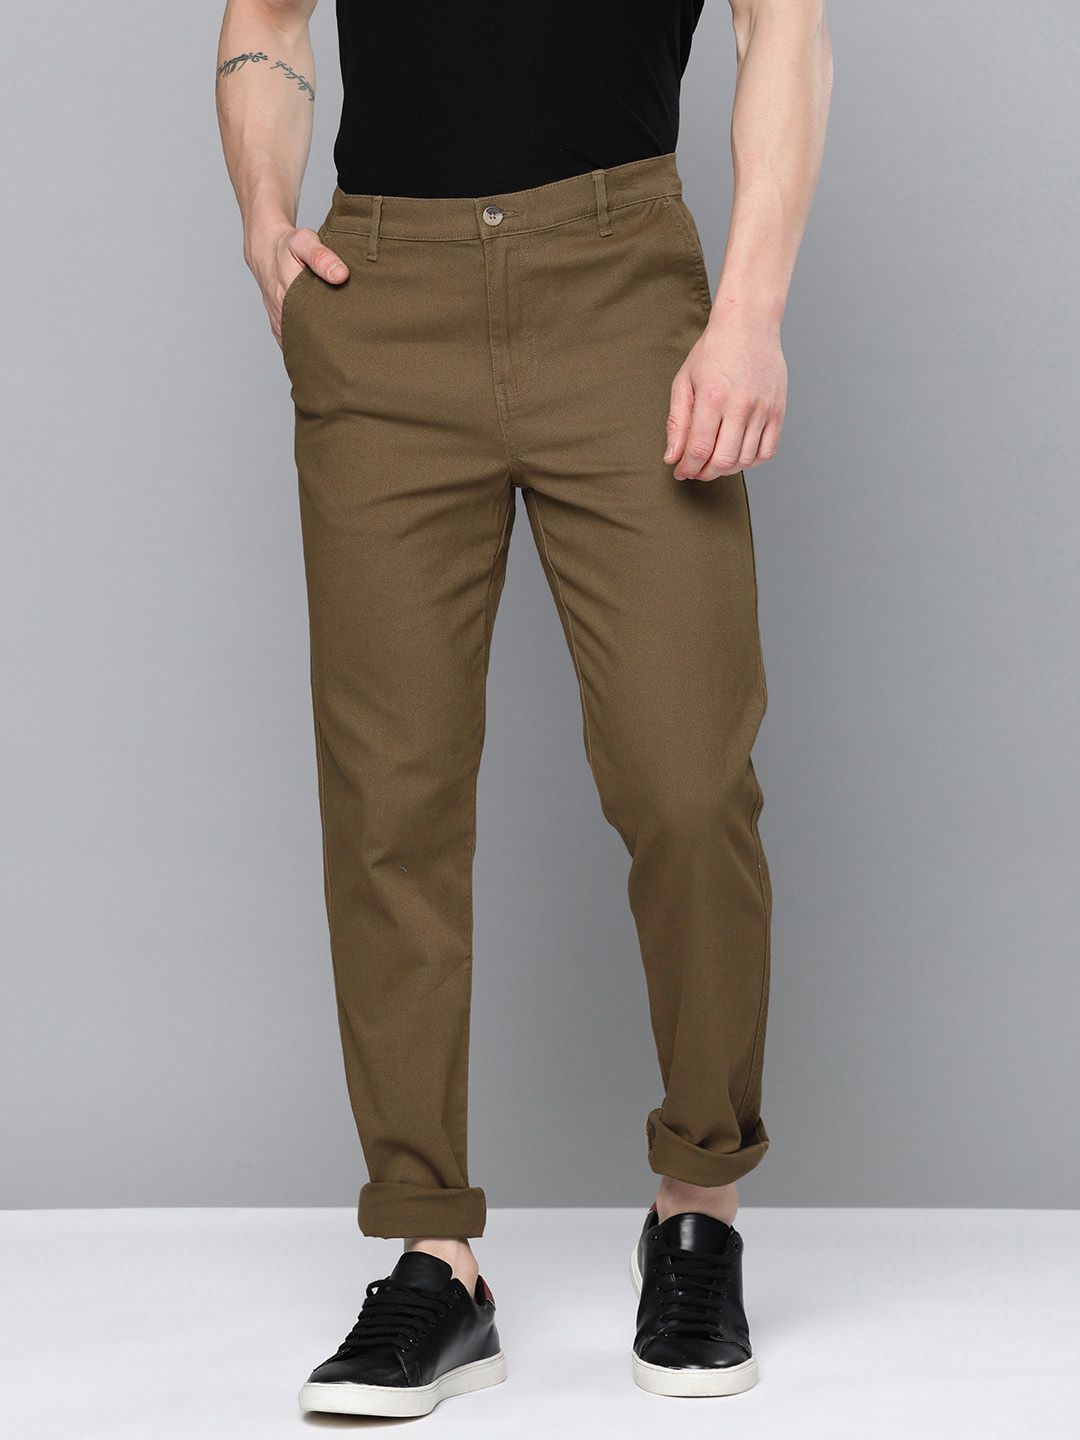 Highlander Trousers  Buy Highlander Trousers Online in India